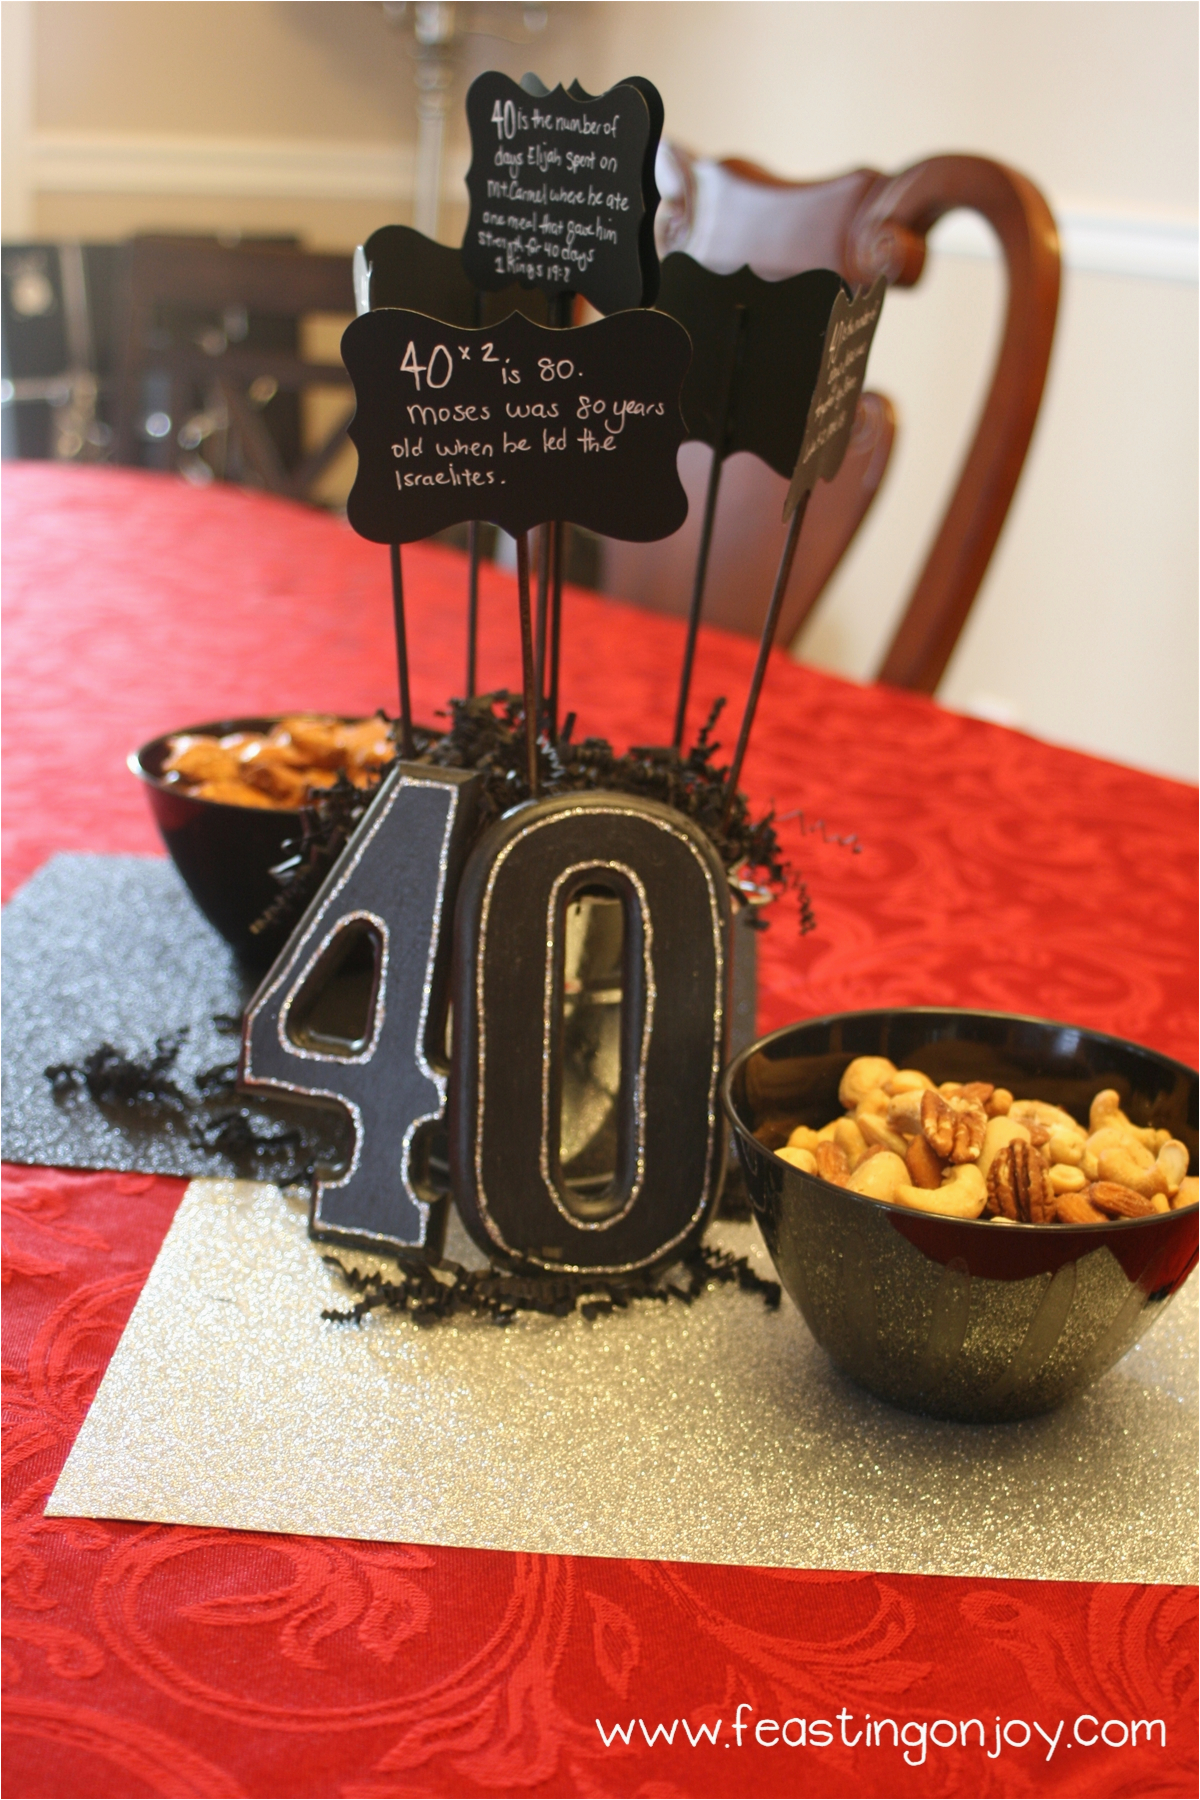 a christian themed manly surprise 40th birthday party